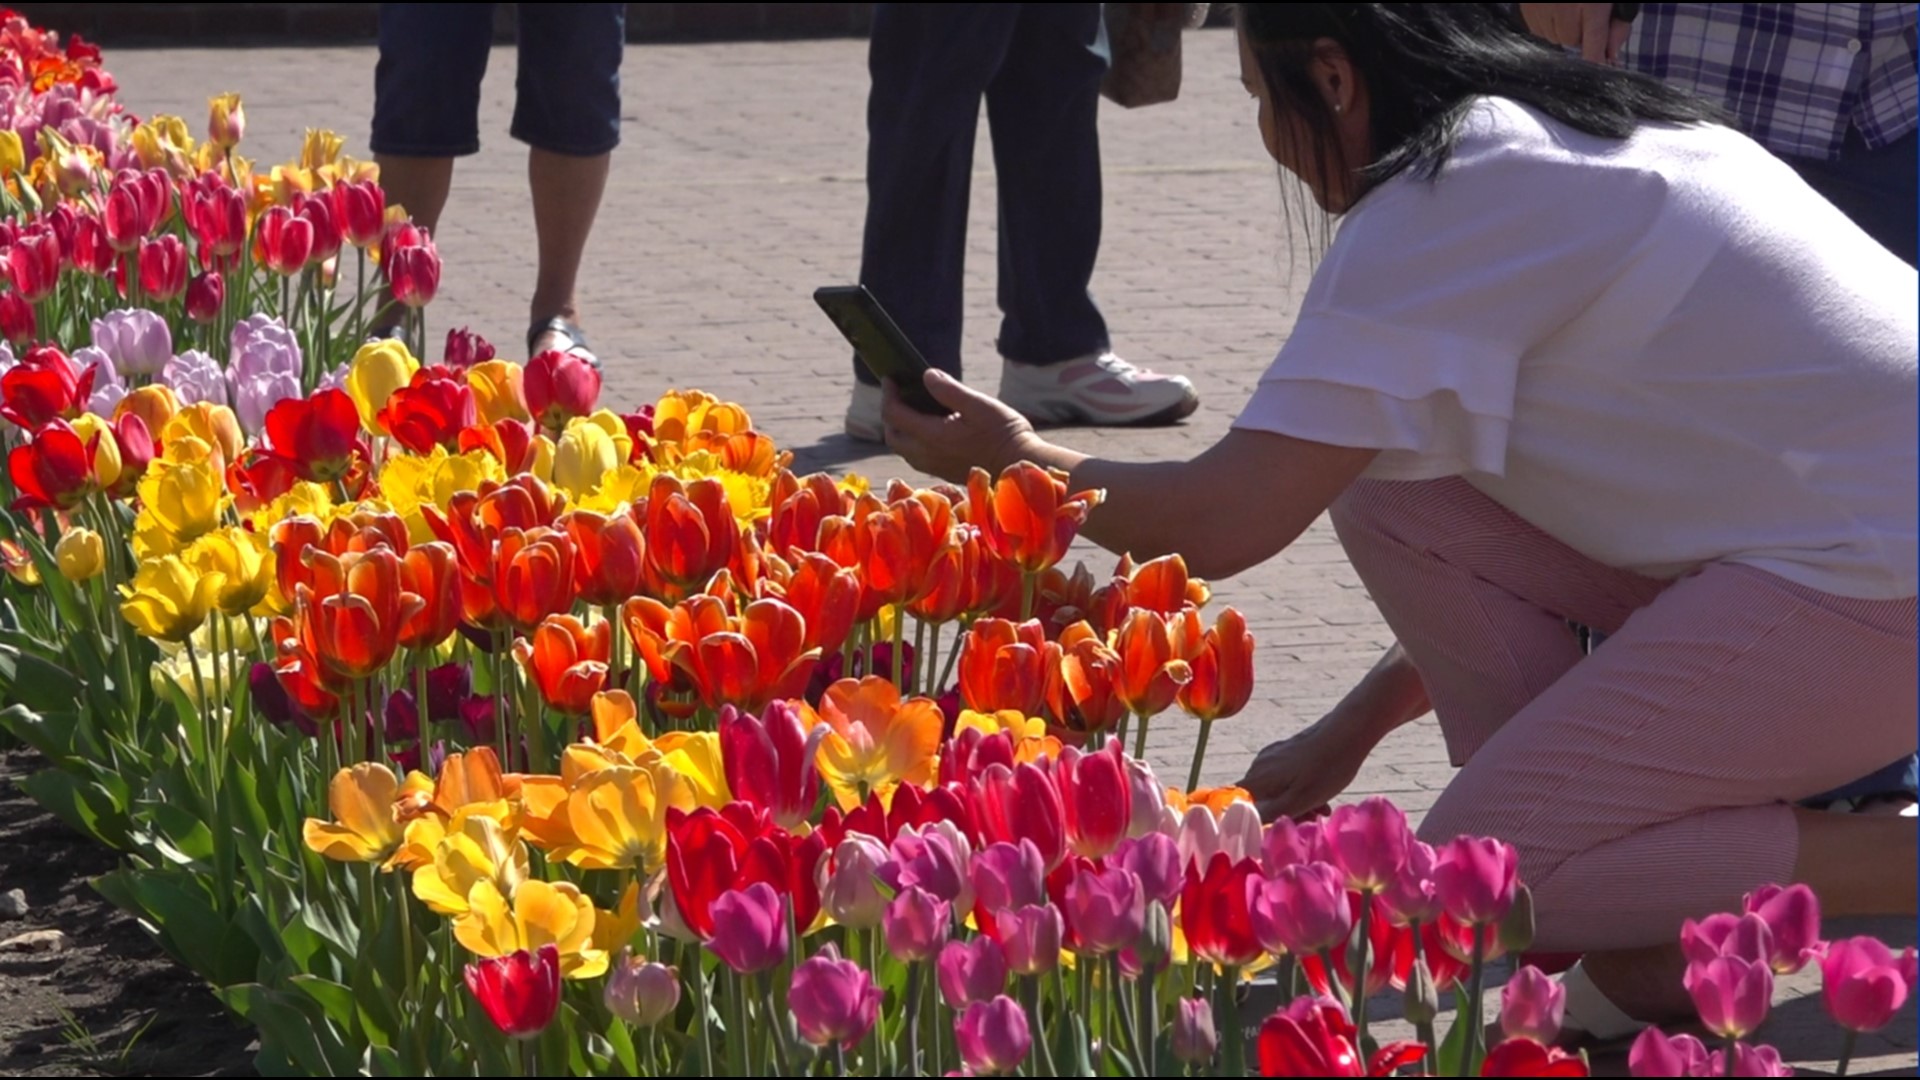 After unpredictable weather this year, gardeners have worked constantly to bring the tulips to full bloom.